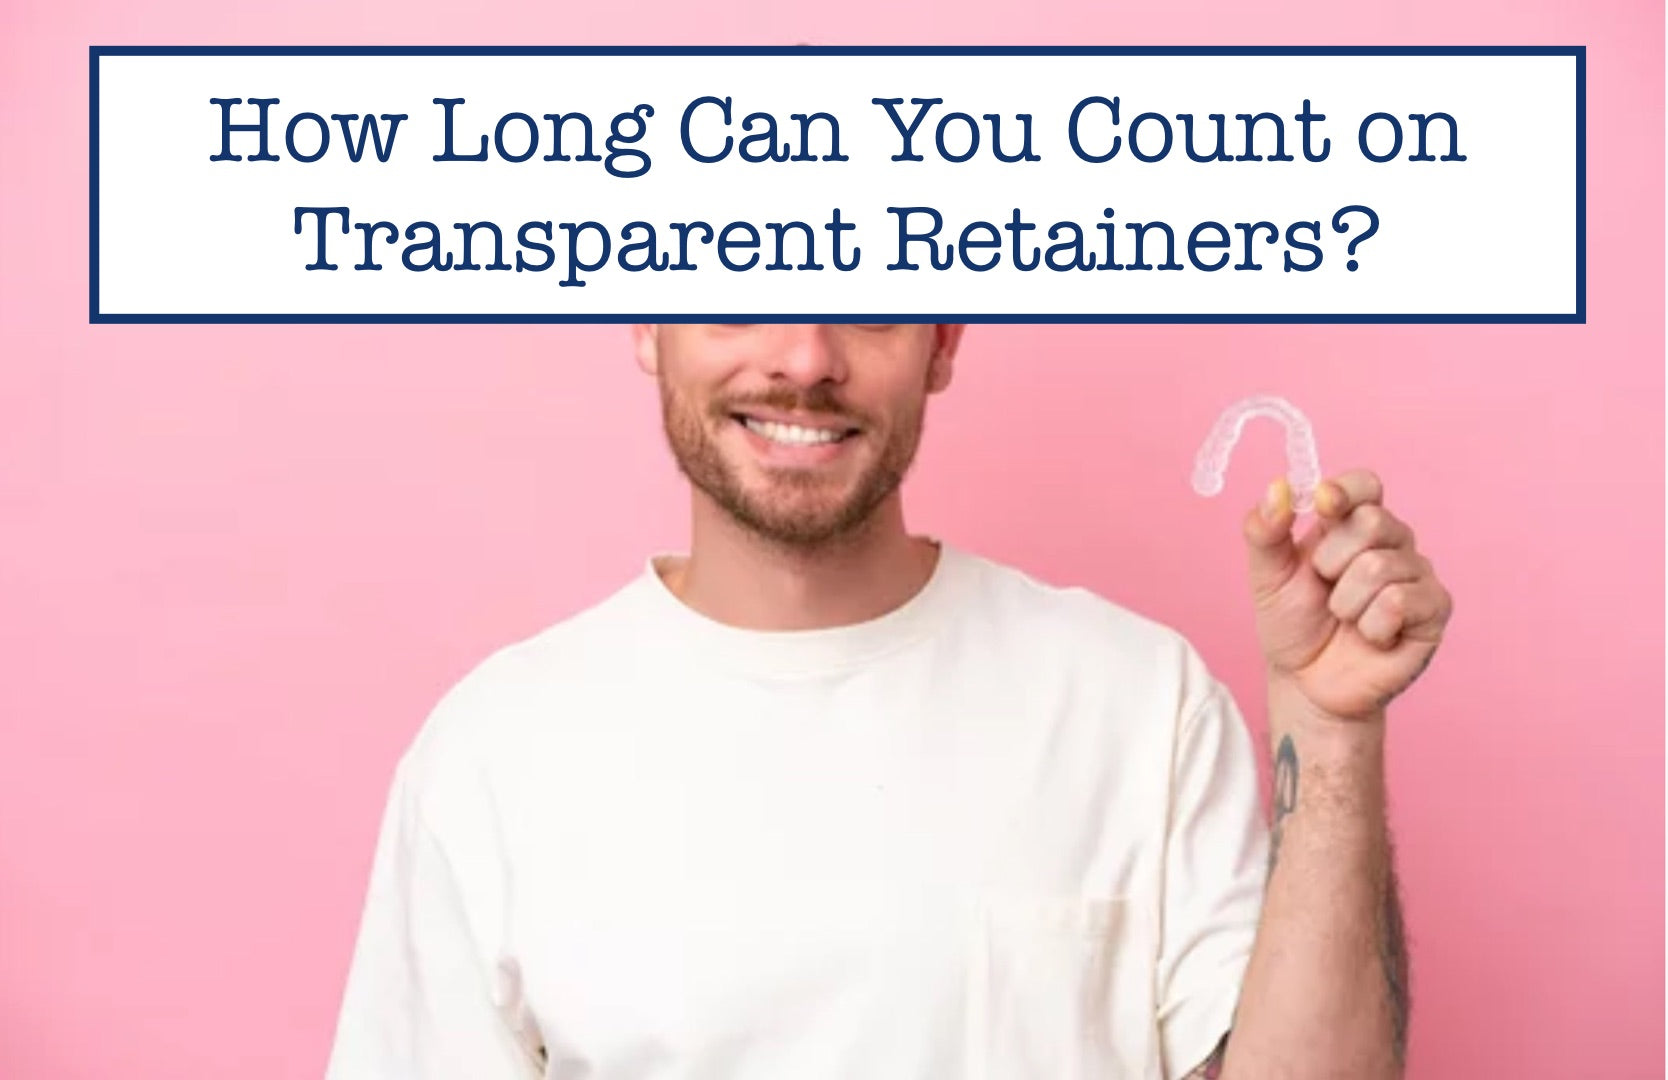 How Long Can You Count on Transparent Retainers?